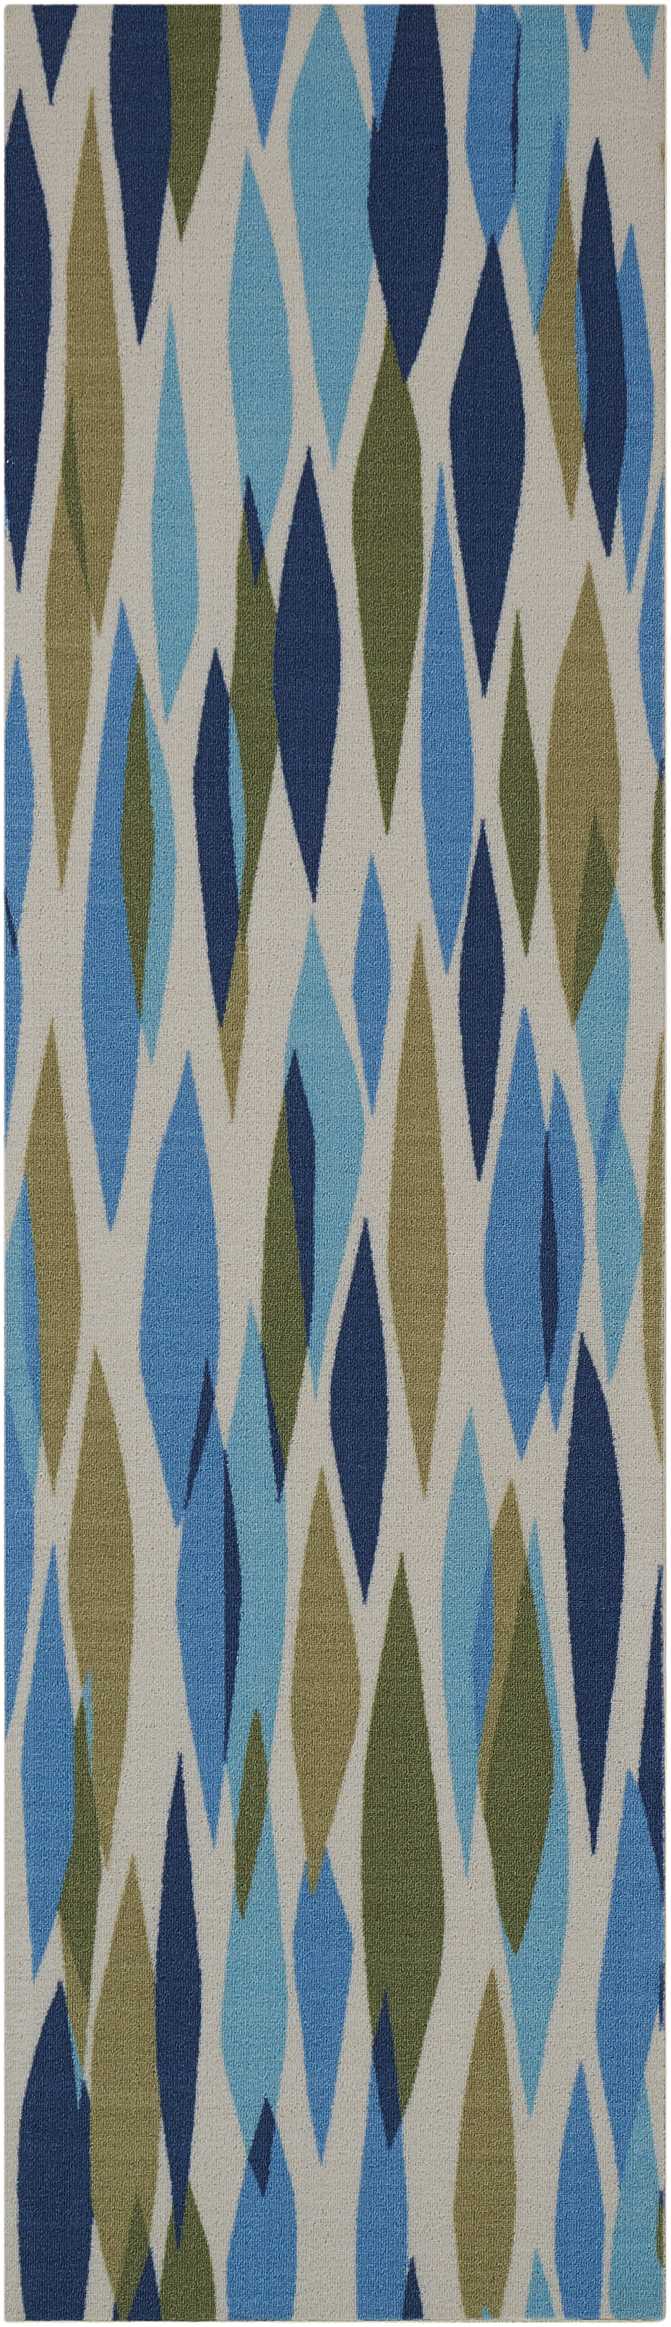 Waverly Sun & Shade Bits & Pieces Seaglass Indoor/Outdoor Area Rug by Nourison